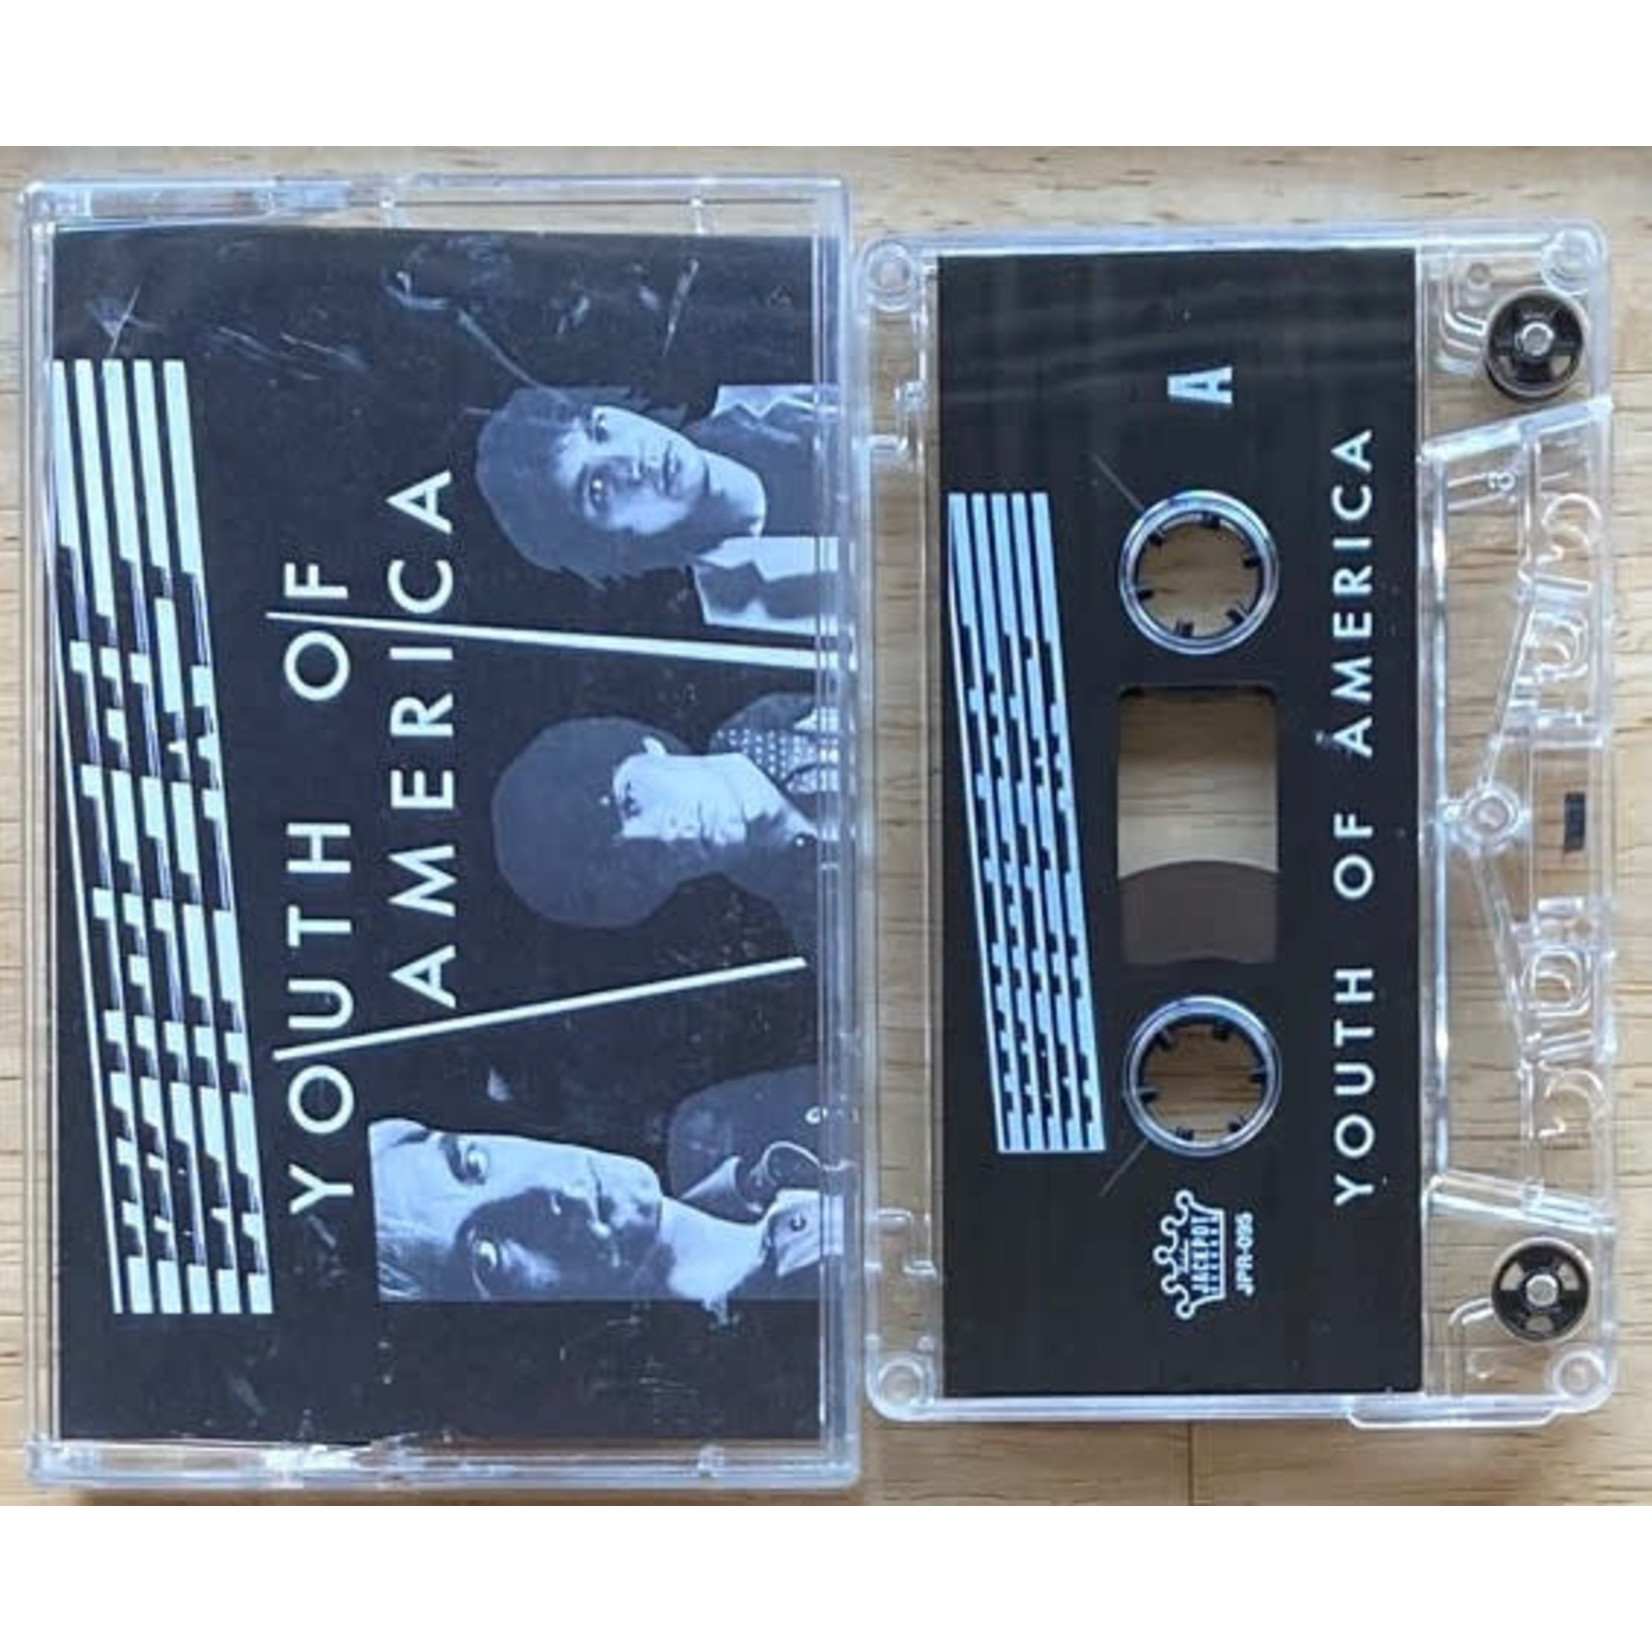 Jackpot Wipers - Youth of America (Tape)